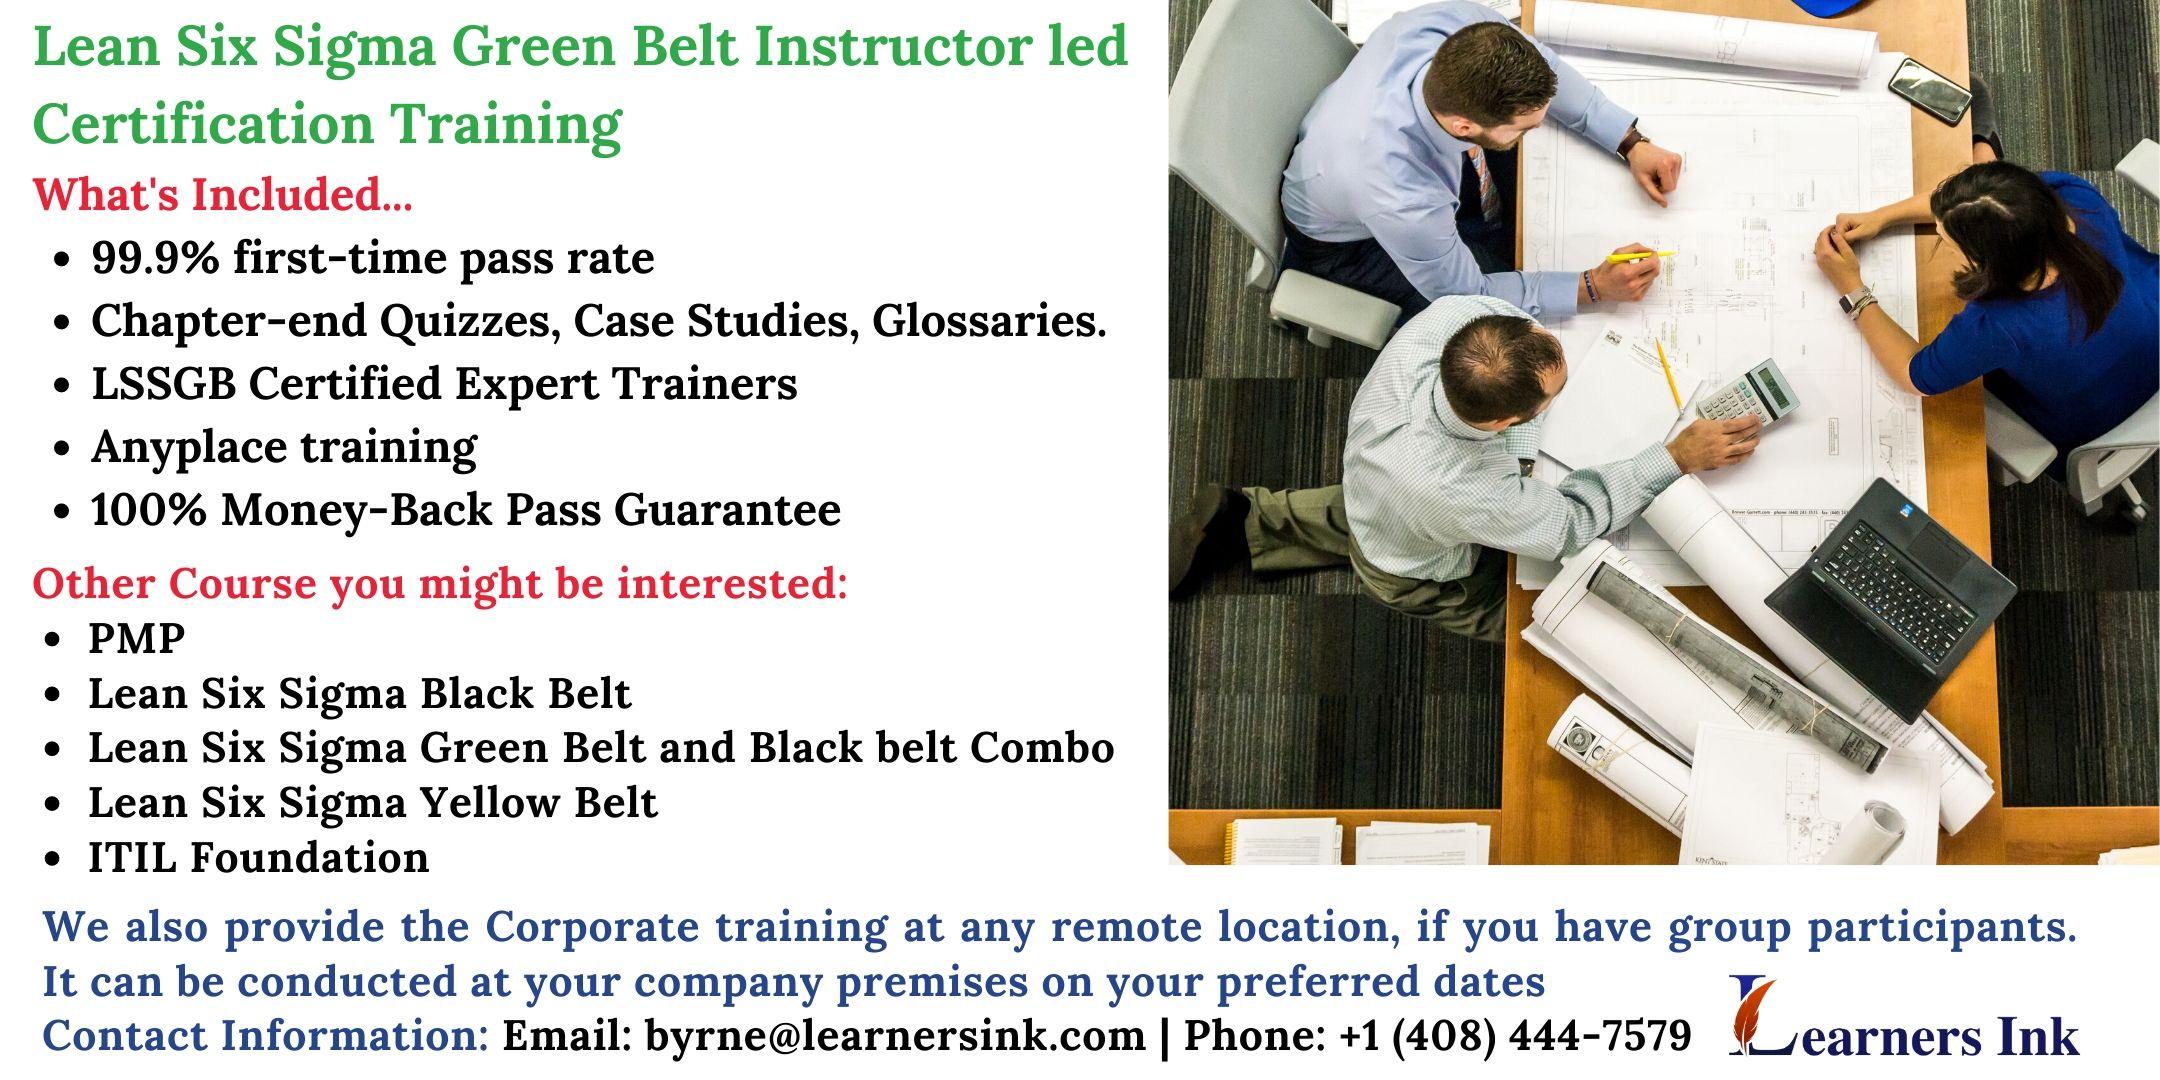 Lean Six Sigma Green Belt Certification Training Course (LSSGB) in Lancaster